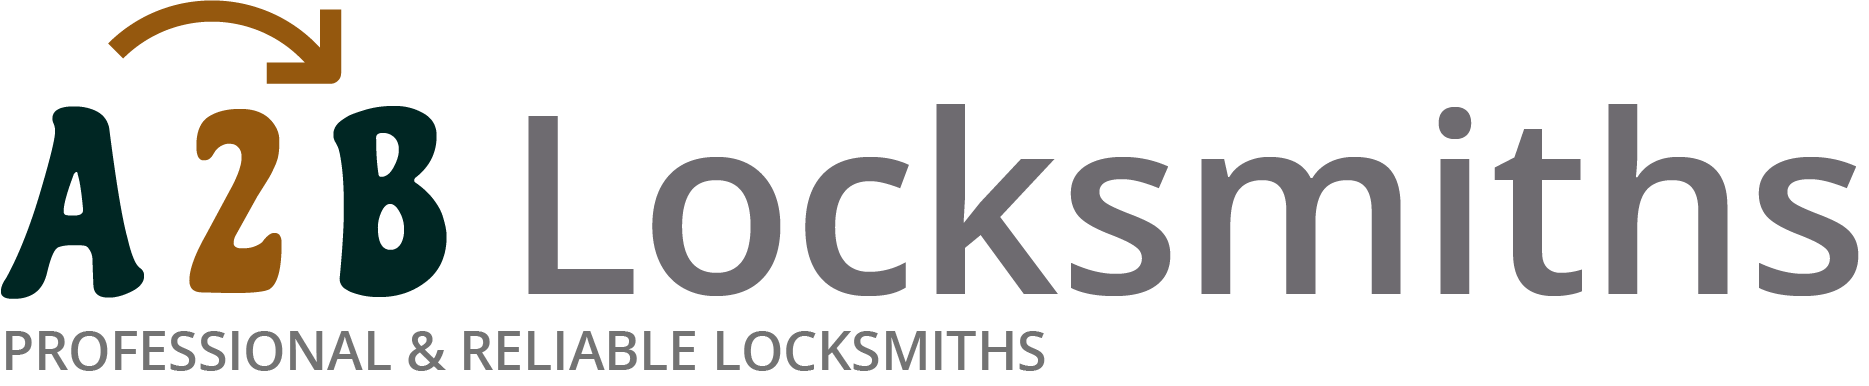 If you are locked out of house in Chatteris, our 24/7 local emergency locksmith services can help you.